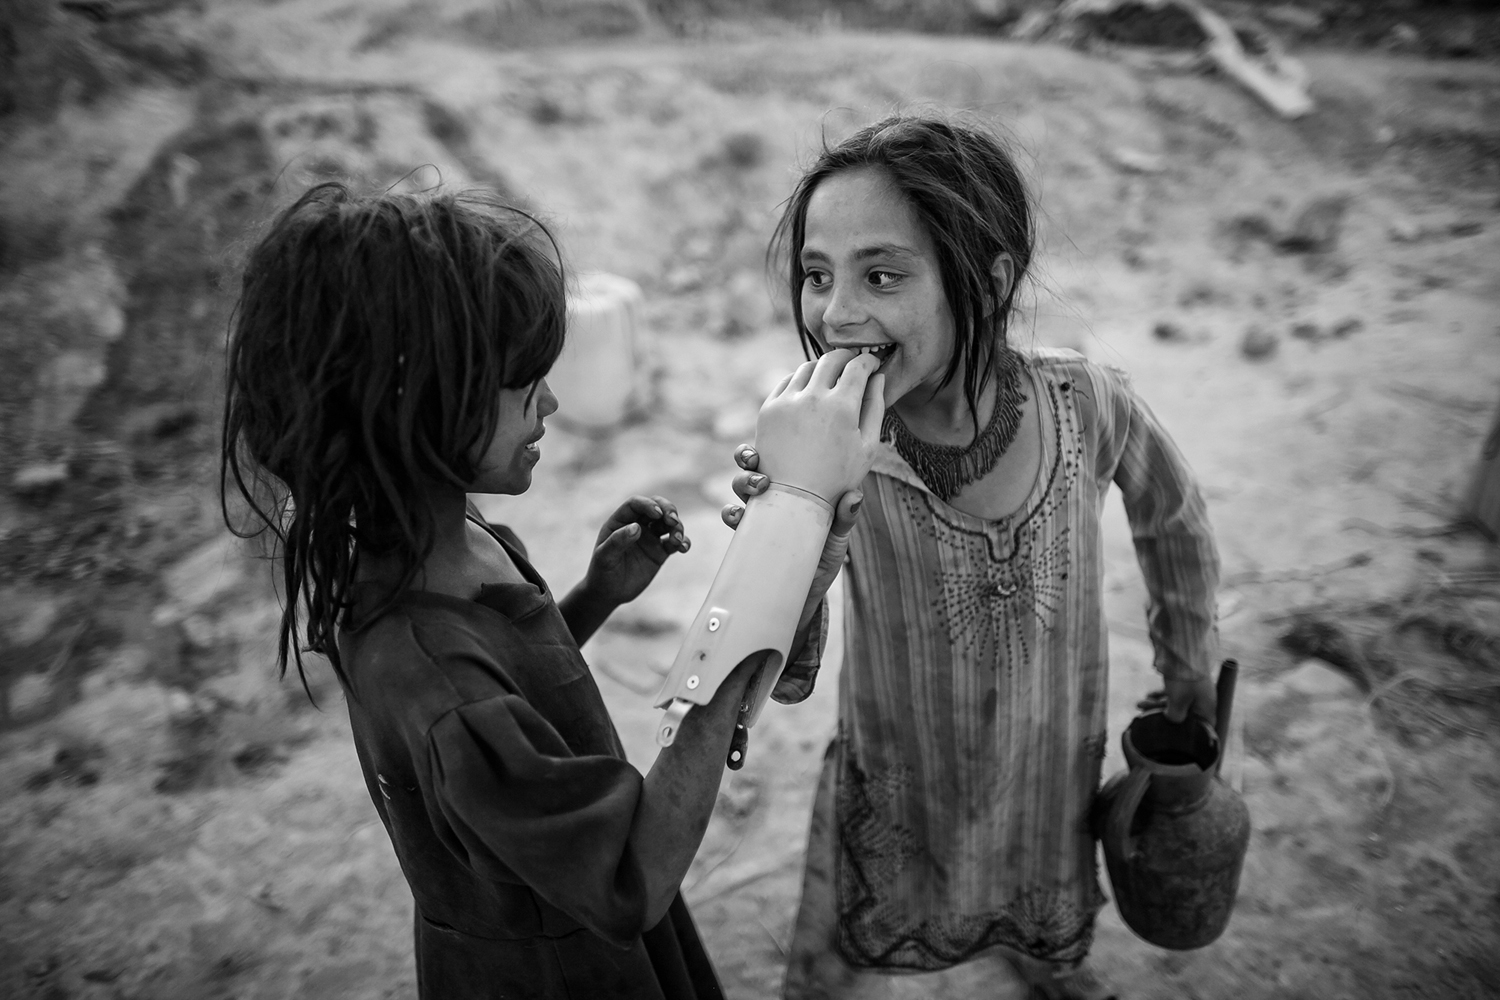 Two Afghan girls play with an artificial hand, south of Kabul.